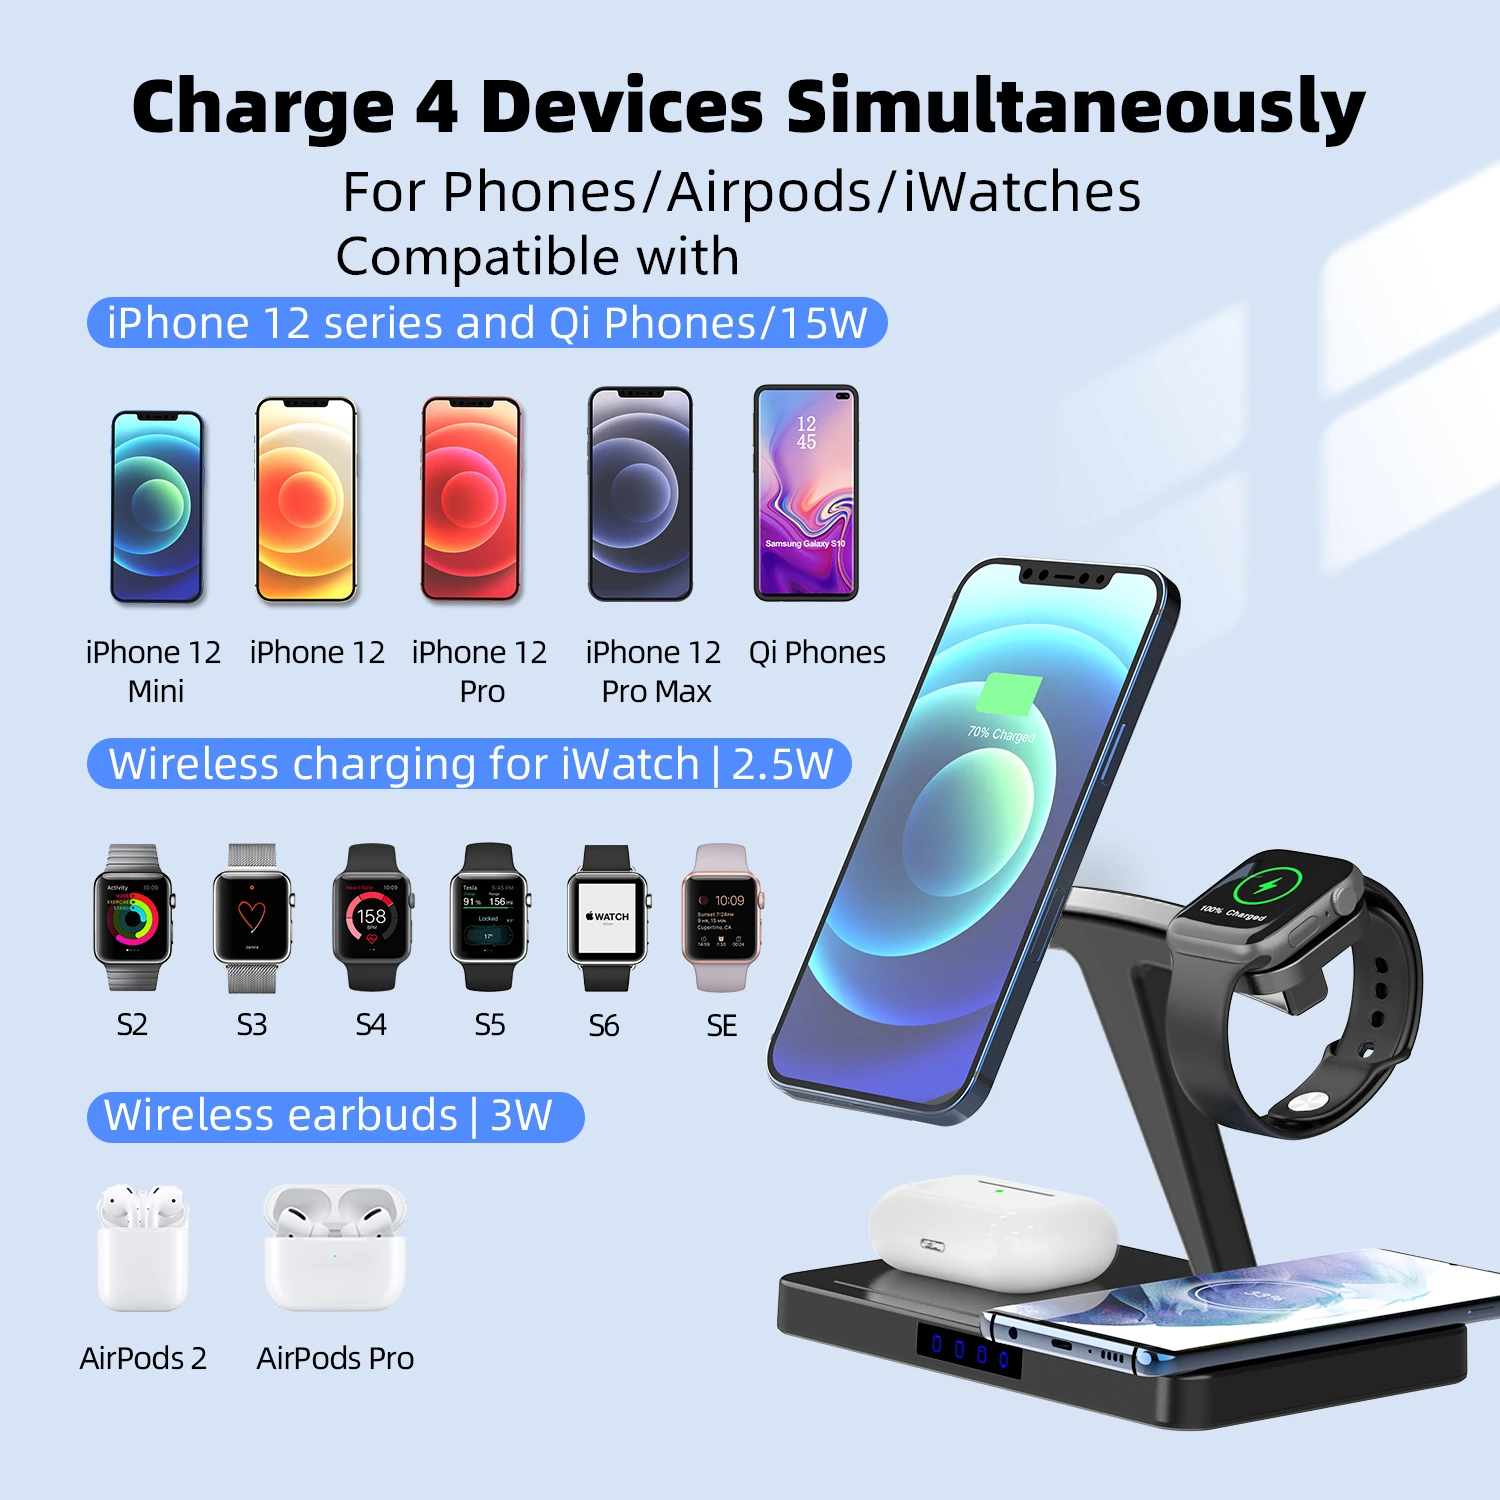 4 in 1 wireless charger stand magnetic qi 36w fast charging station for iphone 13 12 pro max 13mini apple watch se 6 5 4 airpods free global shipping